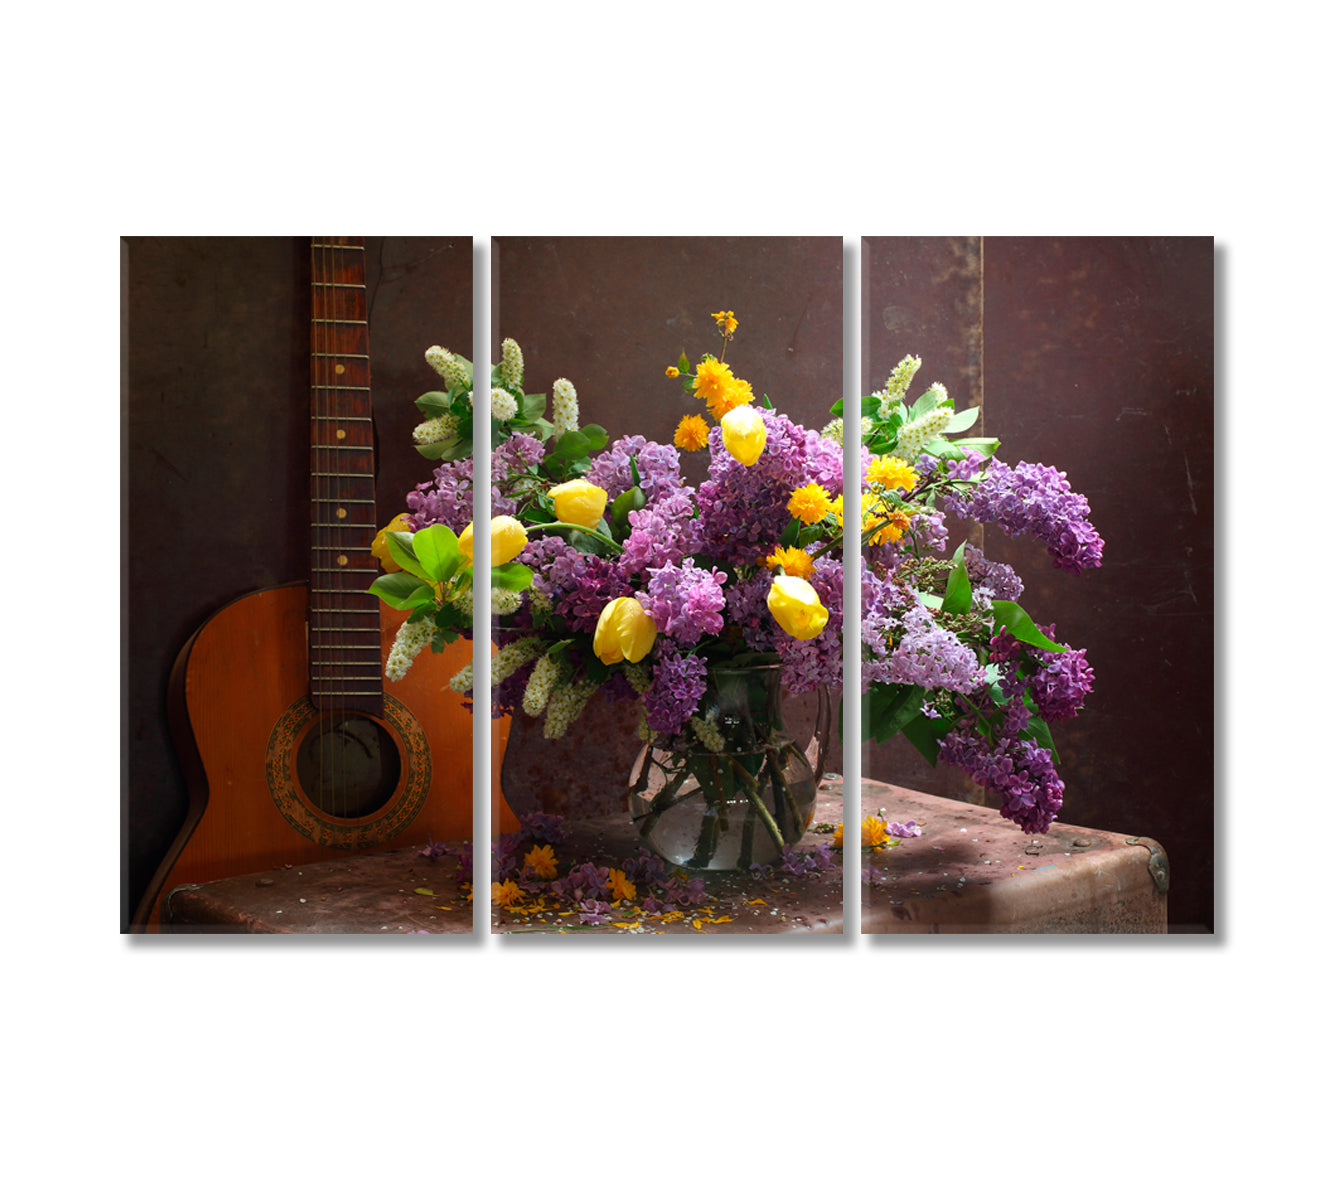 Still Life with Guitar and Magnificent Lilac Flowers Canvas Print-Canvas Print-CetArt-3 Panels-36x24 inches-CetArt